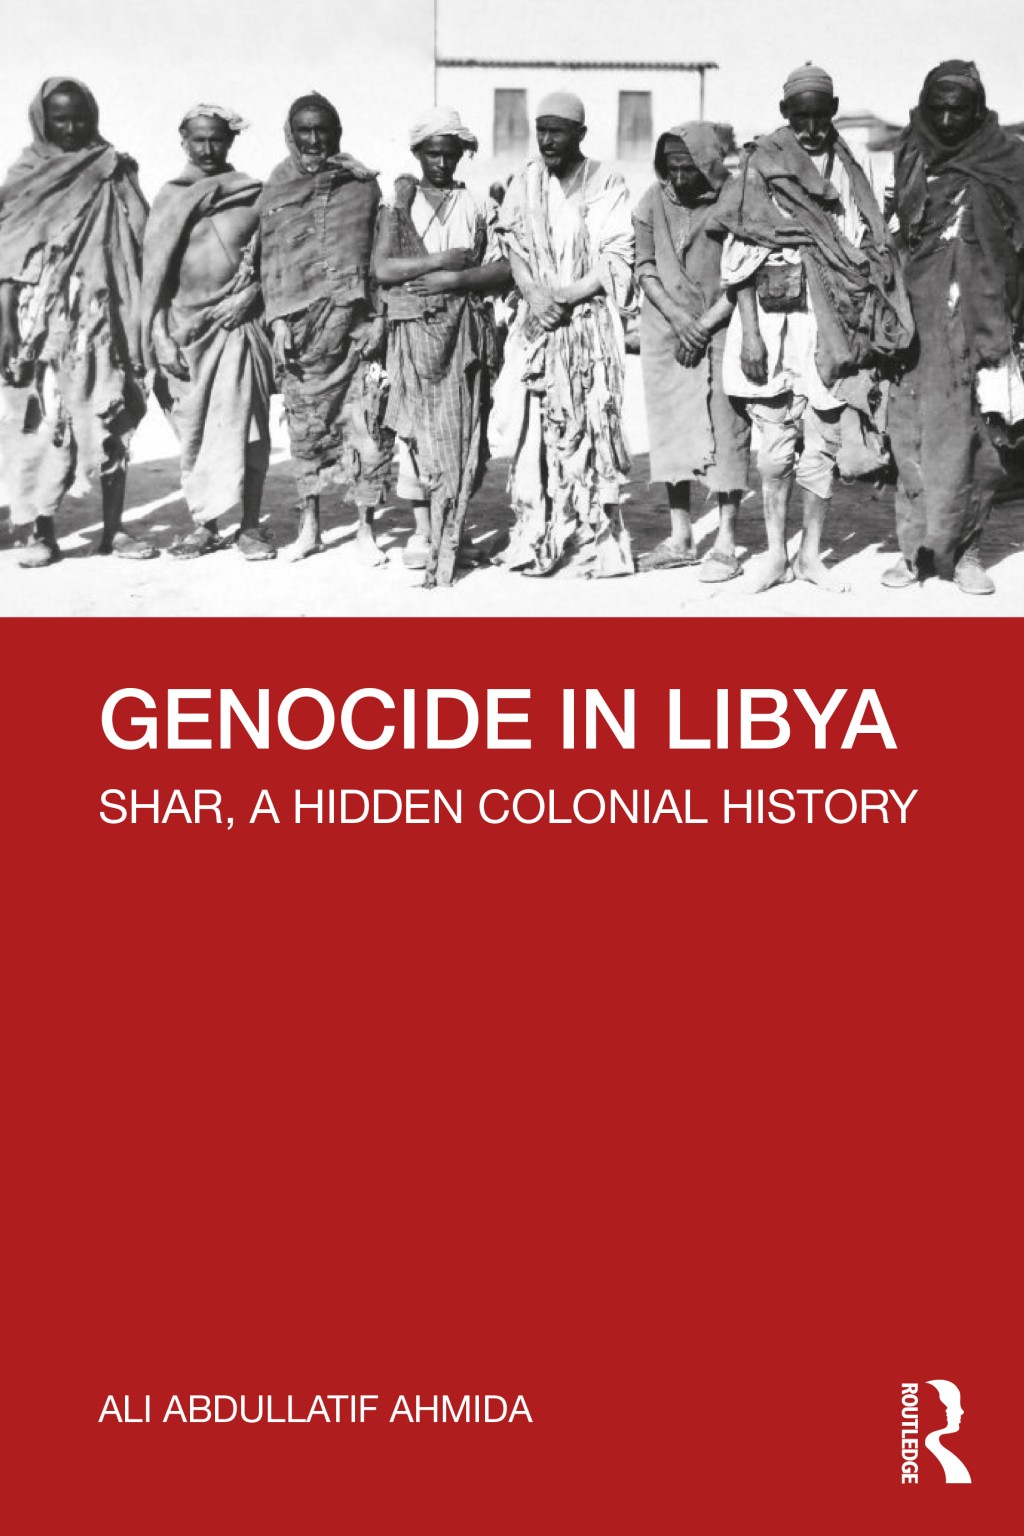 Ahmida's latest book, "Genocide in Libya: Shar, a Hidden Colonial History," will be released Aug. 7.